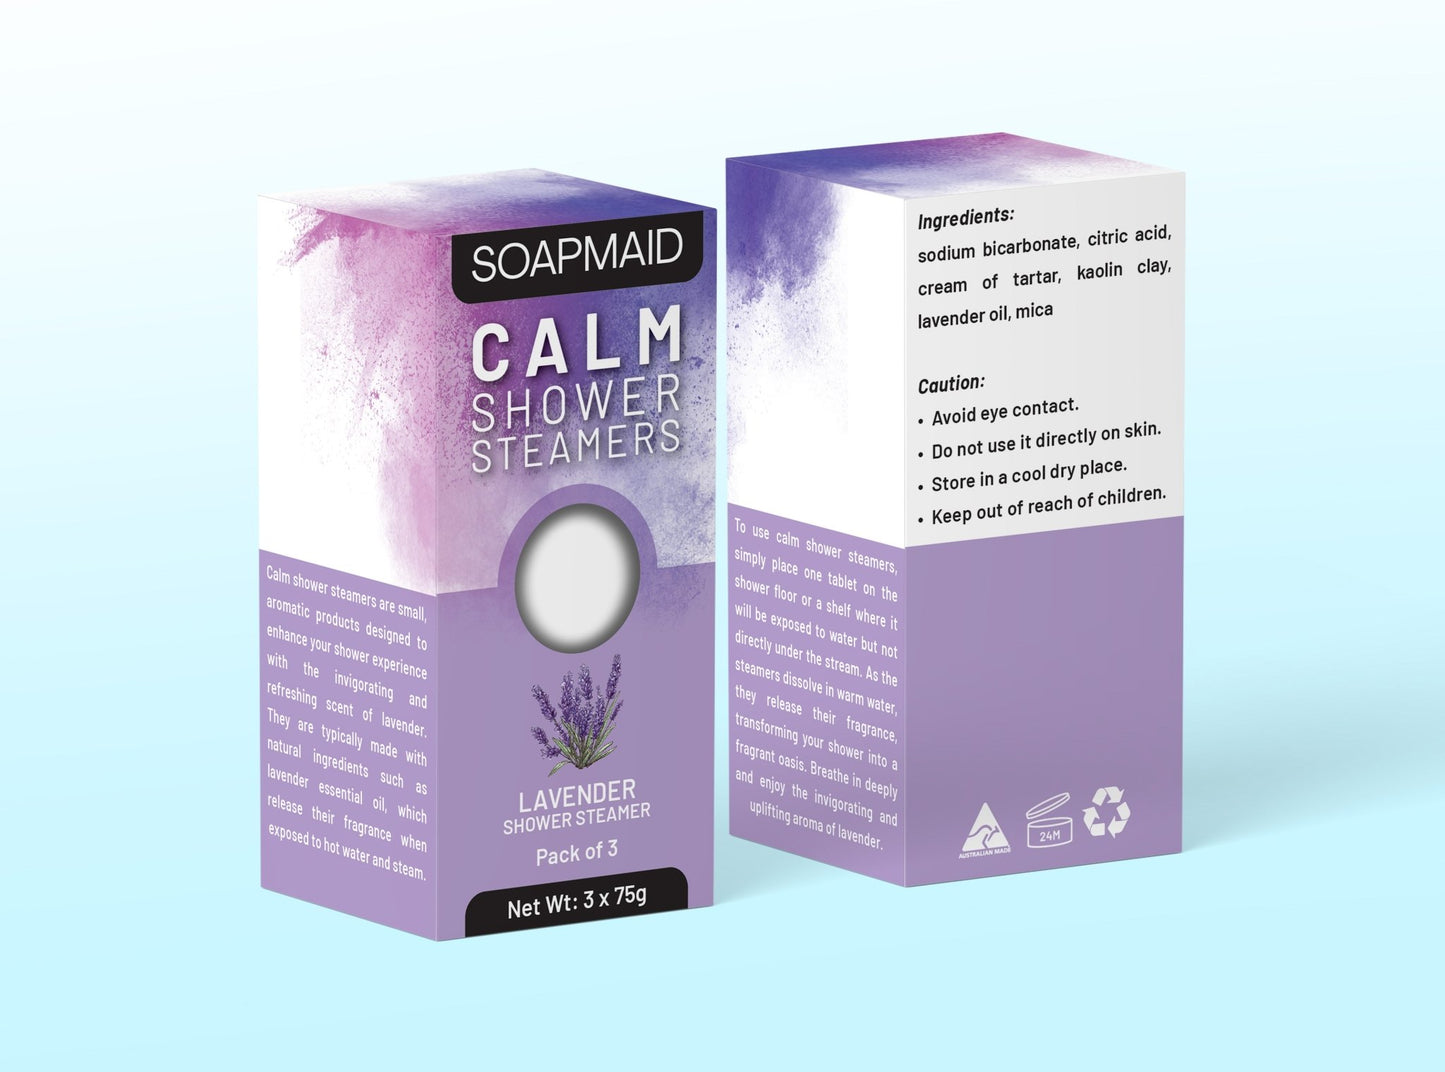 Calm Shower Steamers - Soapmaid